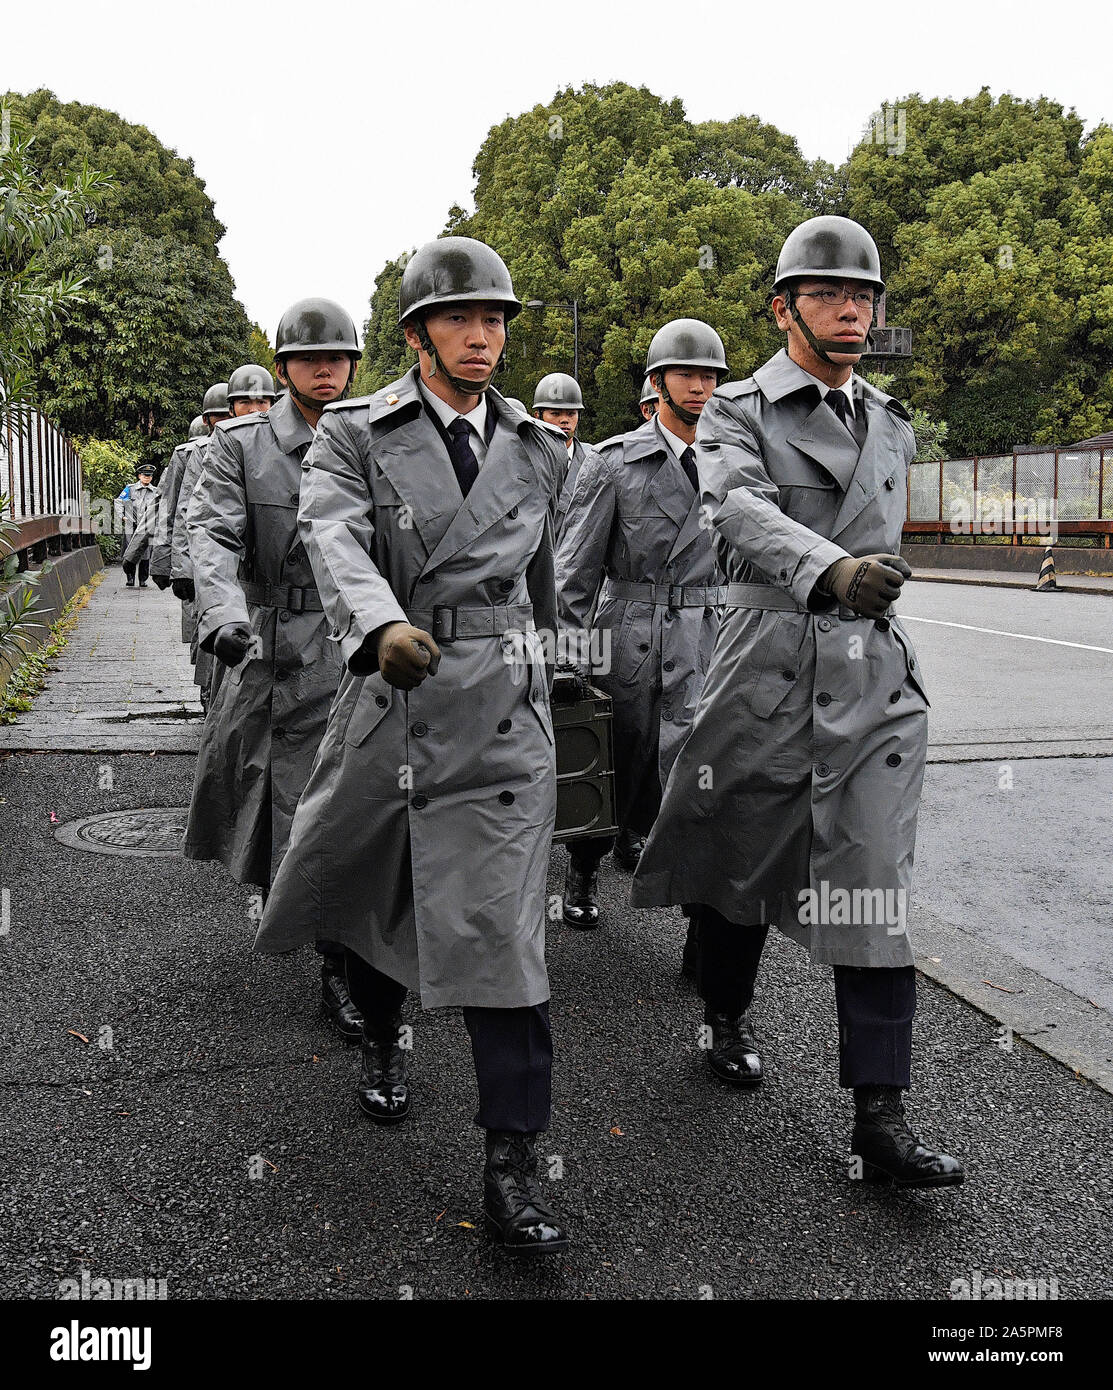 Tokyo, Japan. 22nd Oct, 2019. Members of Japan Ground Self-Defense Forces prepare to fire a 21 gun salute during a proclamation ceremony marking Emperor Naruhito's ascension to the throne at the Kitanomaru Park in Tokyo, Japan on Tuesday, October 22, 2019. New Emperor Naruhito proclaimed his enthronement before roughly 2,000 guests from home and more than 180 countries in a major ancient-style ceremony at the Imperial Palace in Tokyo that will be steeped in solemnity and tradition. Credit: UPI/Alamy Live News Stock Photo